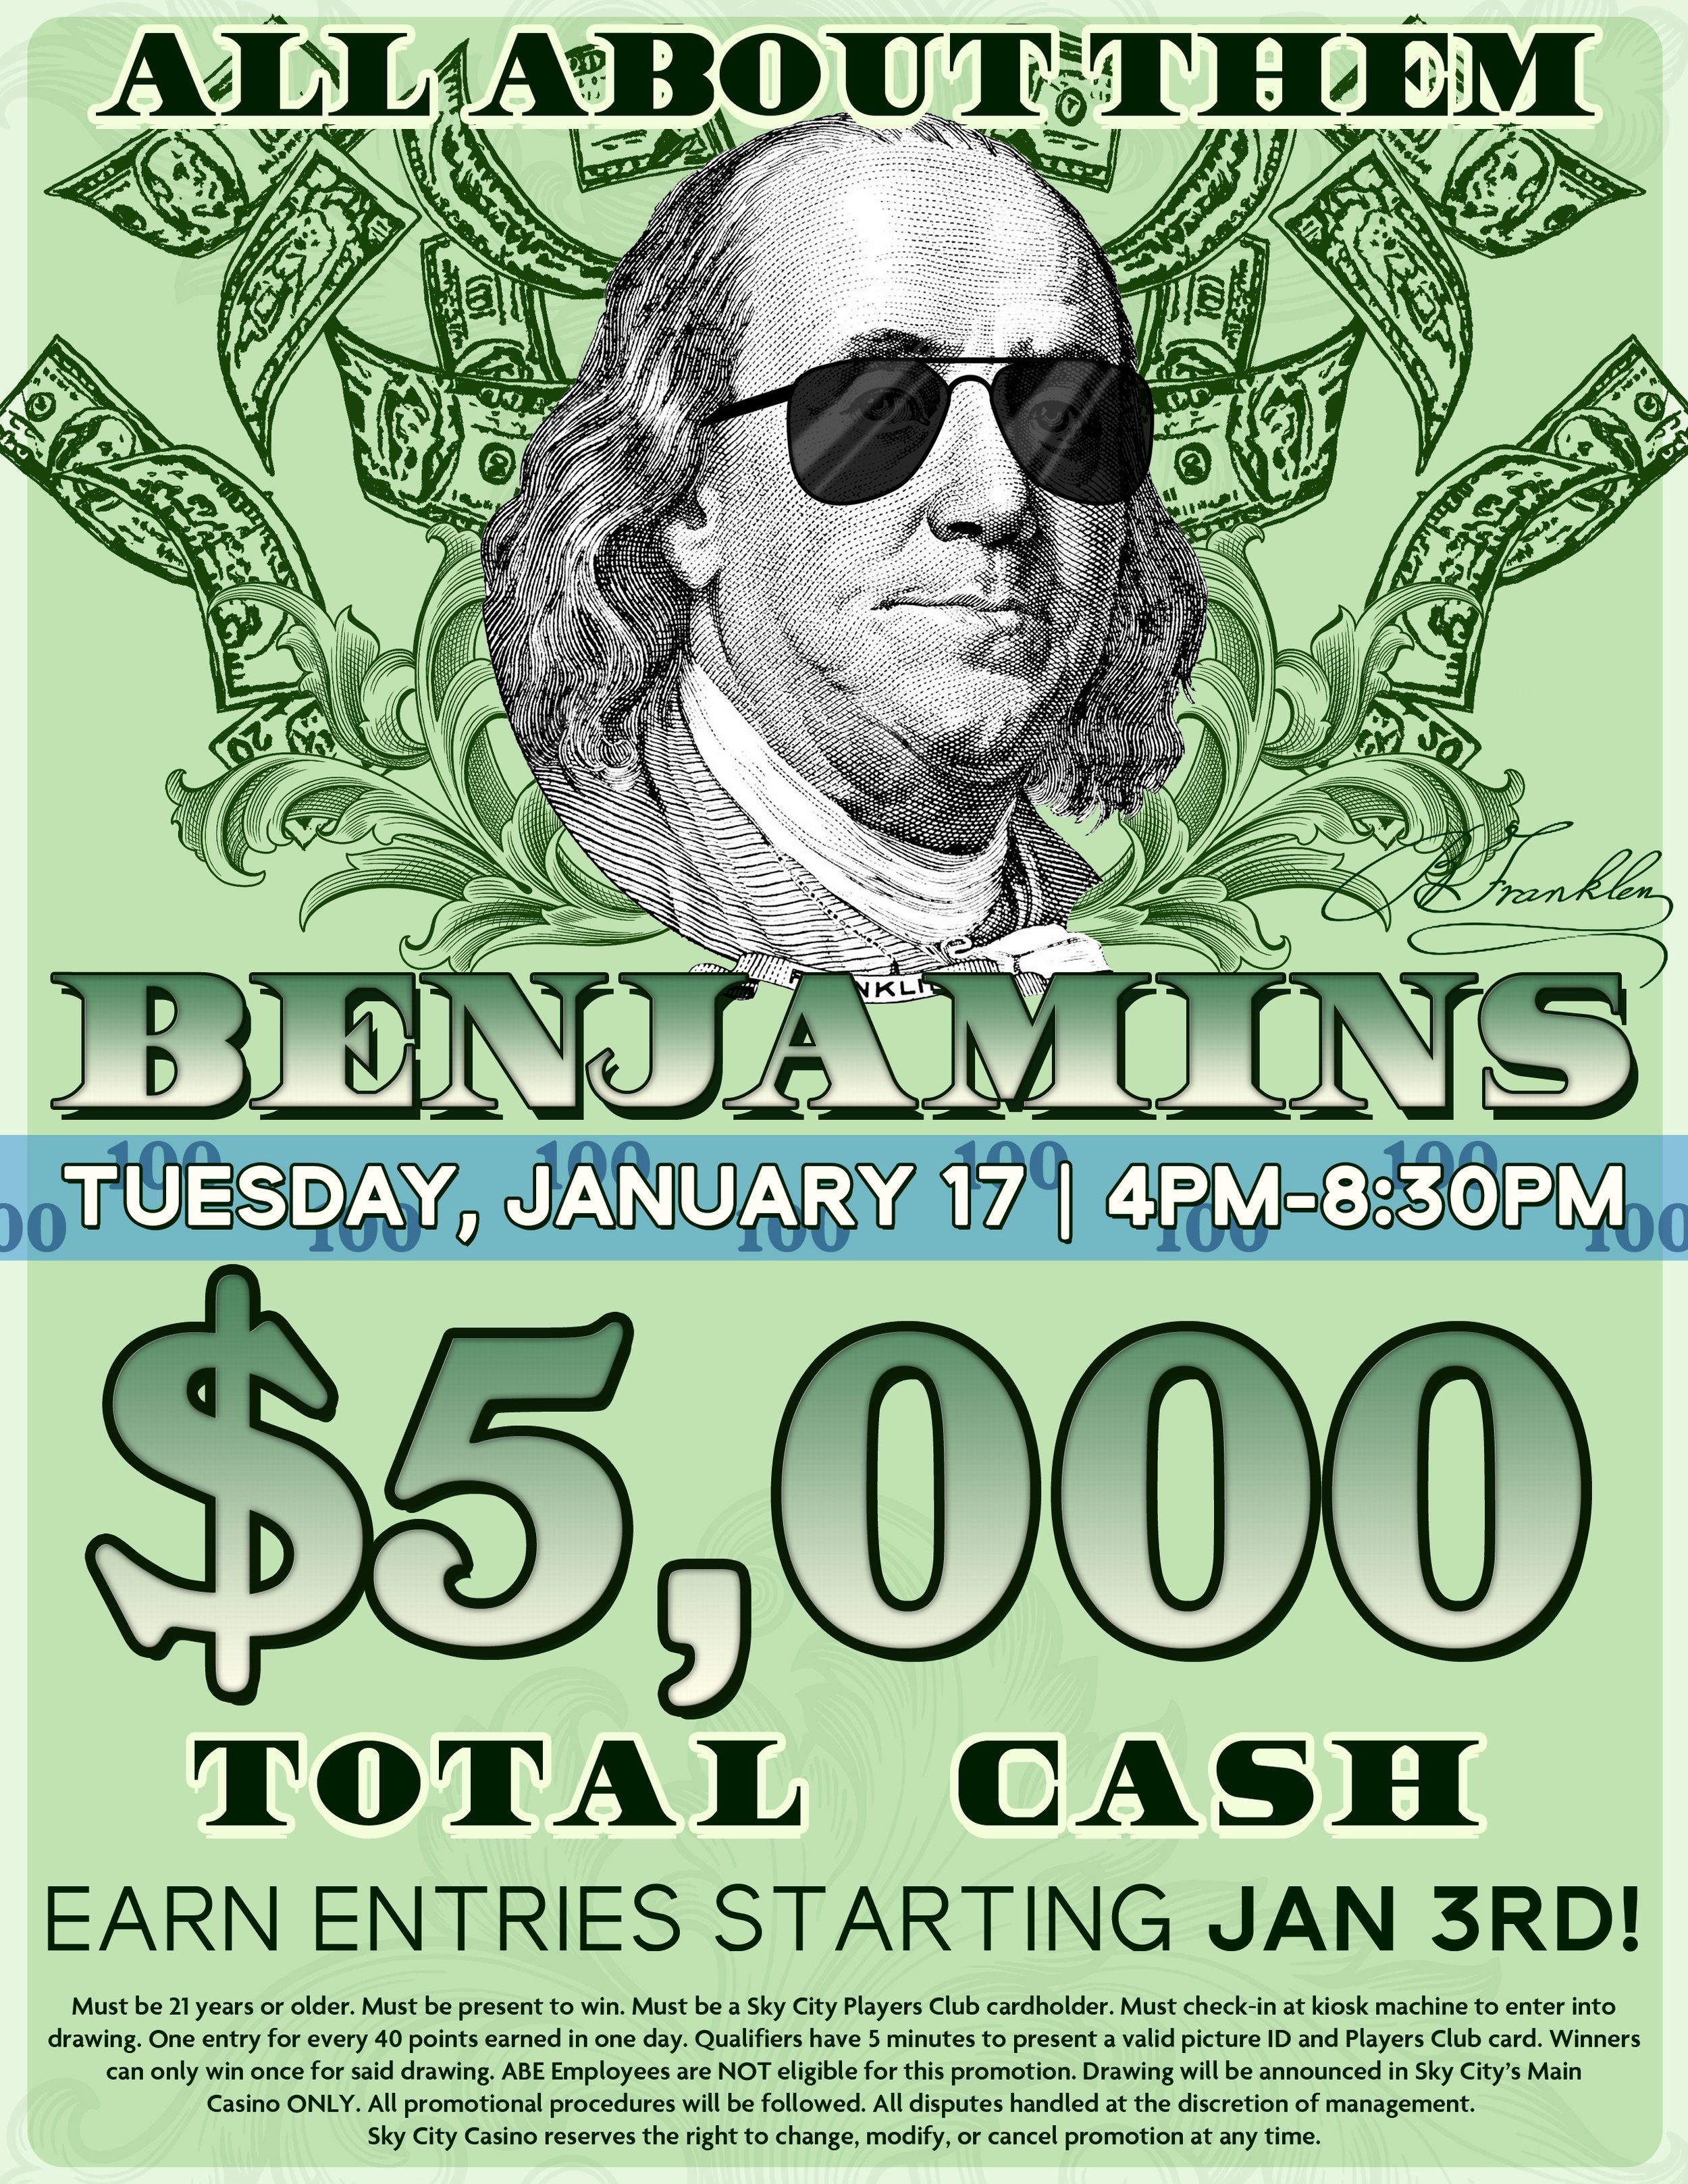 All About Them Benjamins.jpg